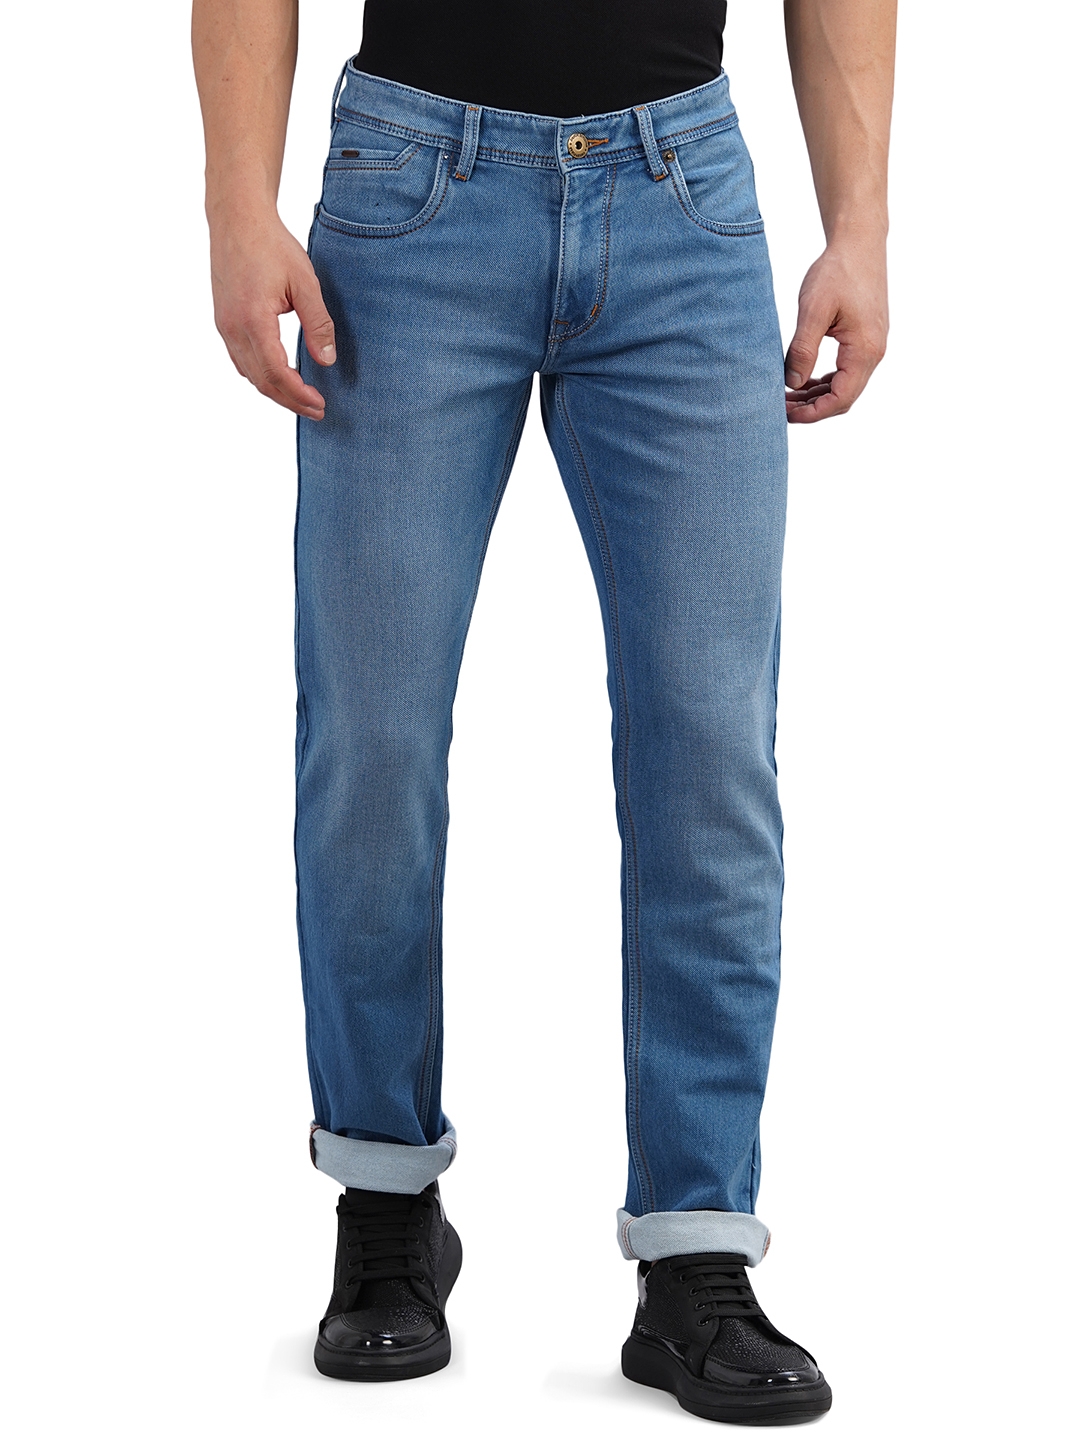 Greenfibre | Cloud Blue Striped Straight Fit Jeans | Greenfibre